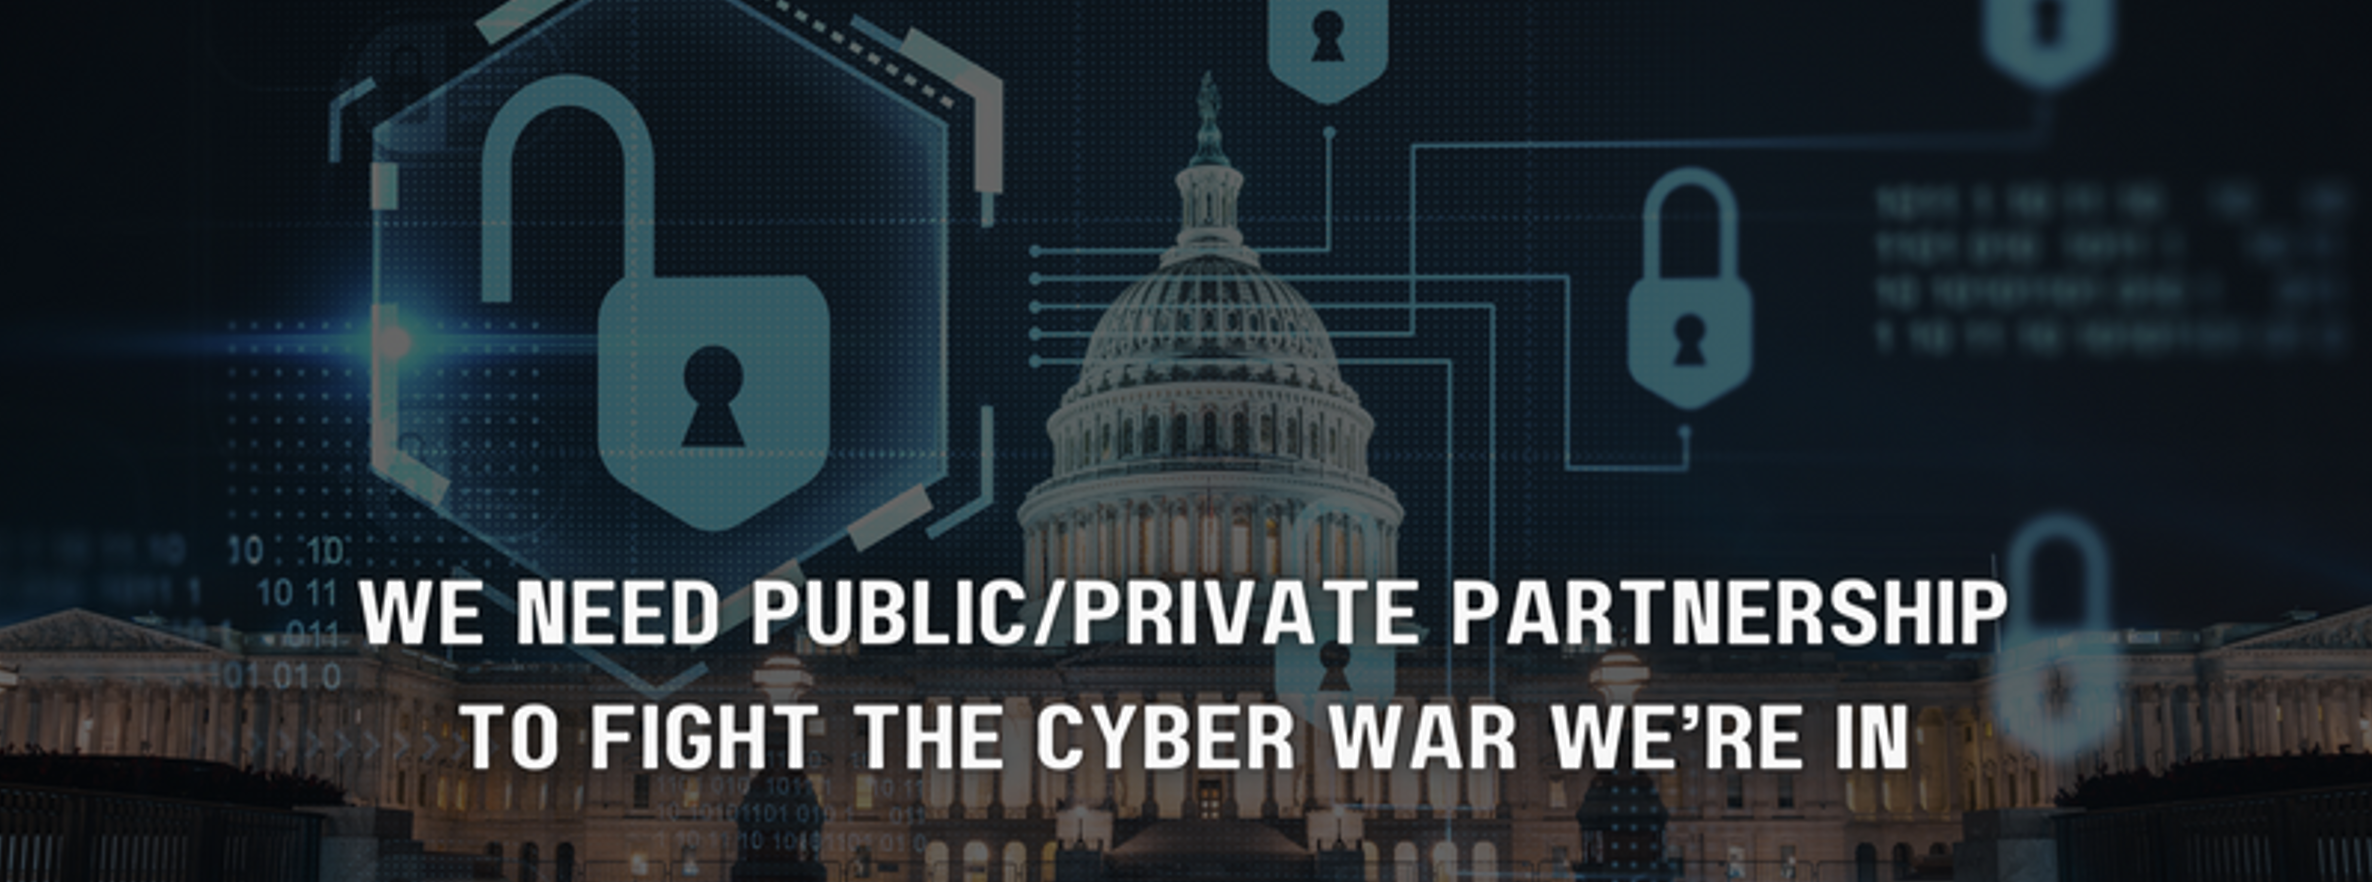 We Need Public/Private Partnership to Fight the Cyber War We’re In